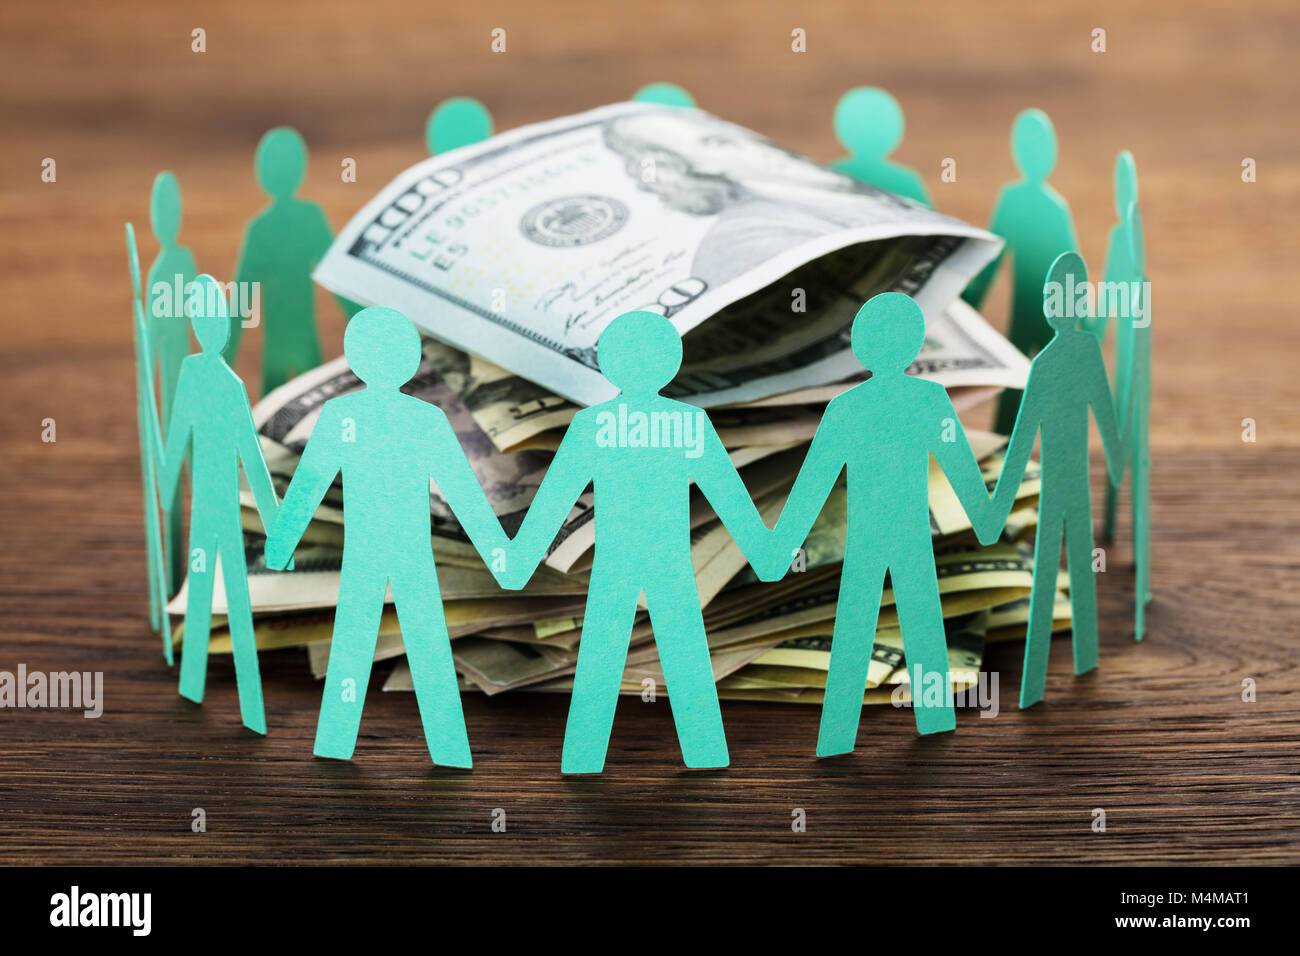 Crowdfunding Concept. Paper Cut Out Human Figures Around The Stack Of Hundred Dollar Bills Stock Photo